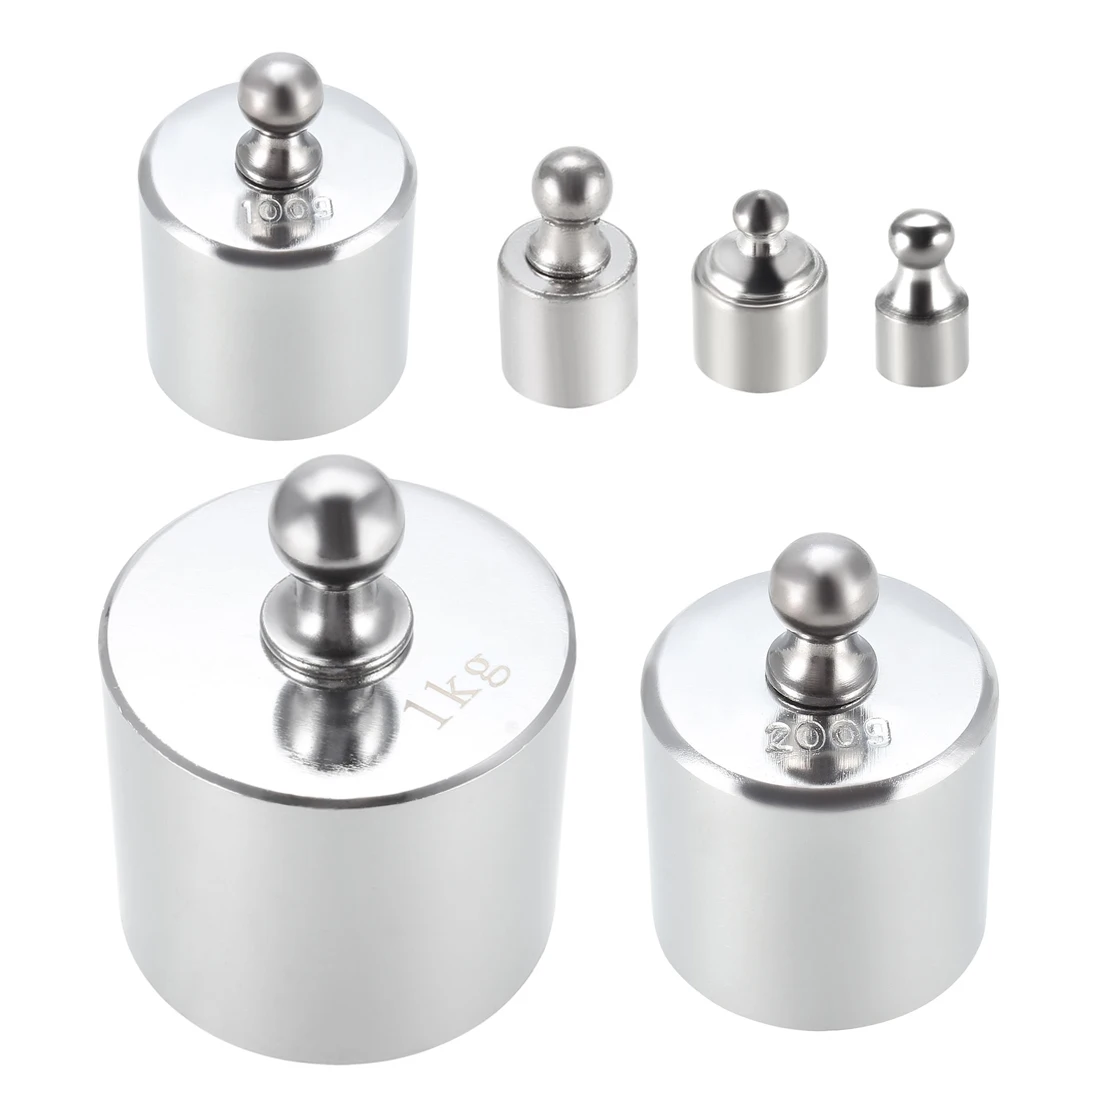 

uxcell Gram Calibration Weight 1g 2g 5g 100g 200g 1kg M2 Precision Chrome Plated Steel for Balance Scales and Balance Test